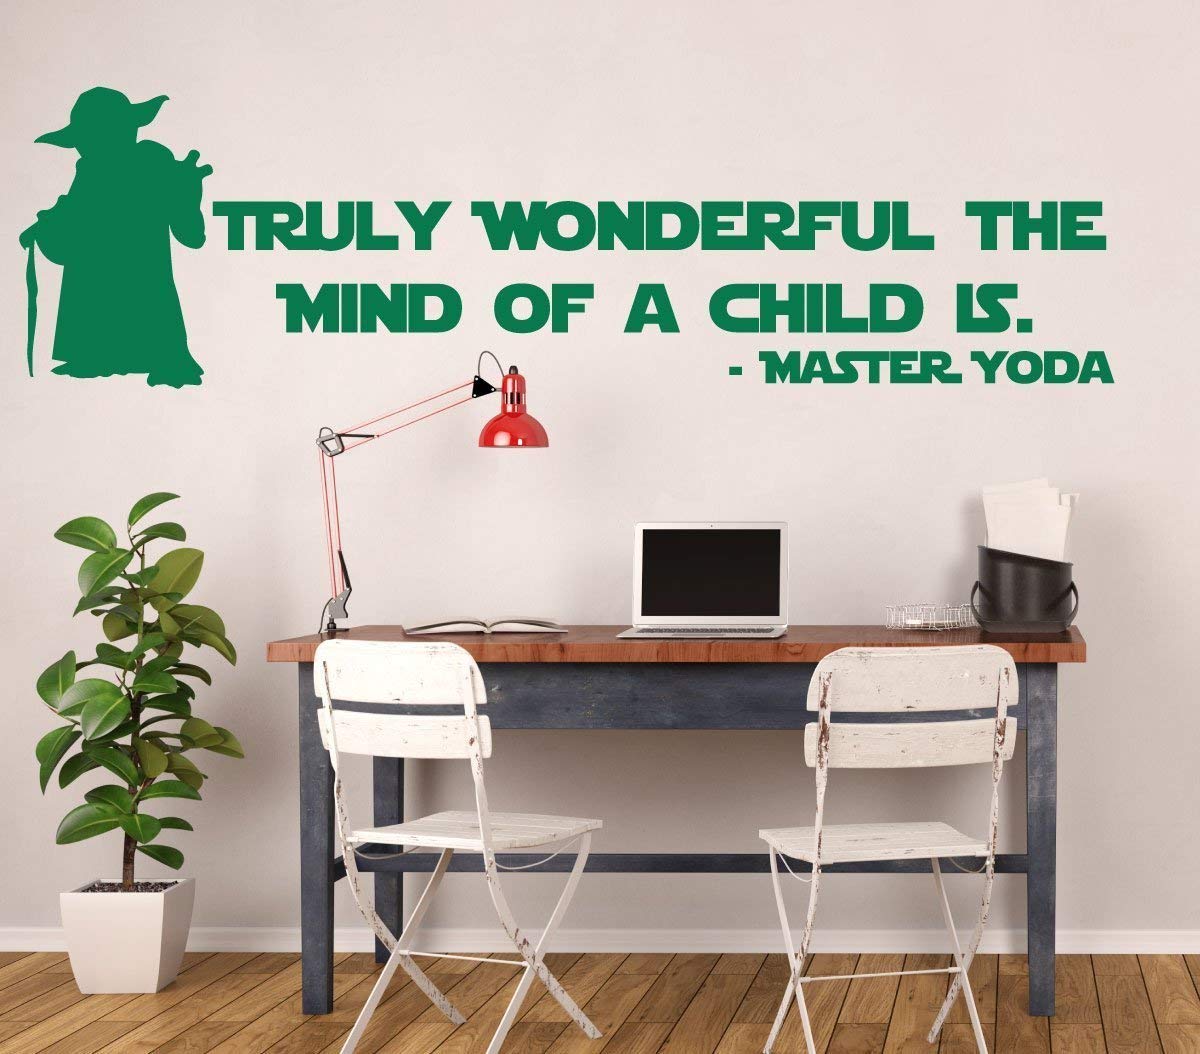 Yoda Child Quote Decal - Star Wars Master Jedi Vinyl Sticker - "Truly Wonderful The Mind Of A Child Is" - Wall Art Decor for Classrooms, Library, Boy's or Girl's Bedroom, Playroom or Nursery